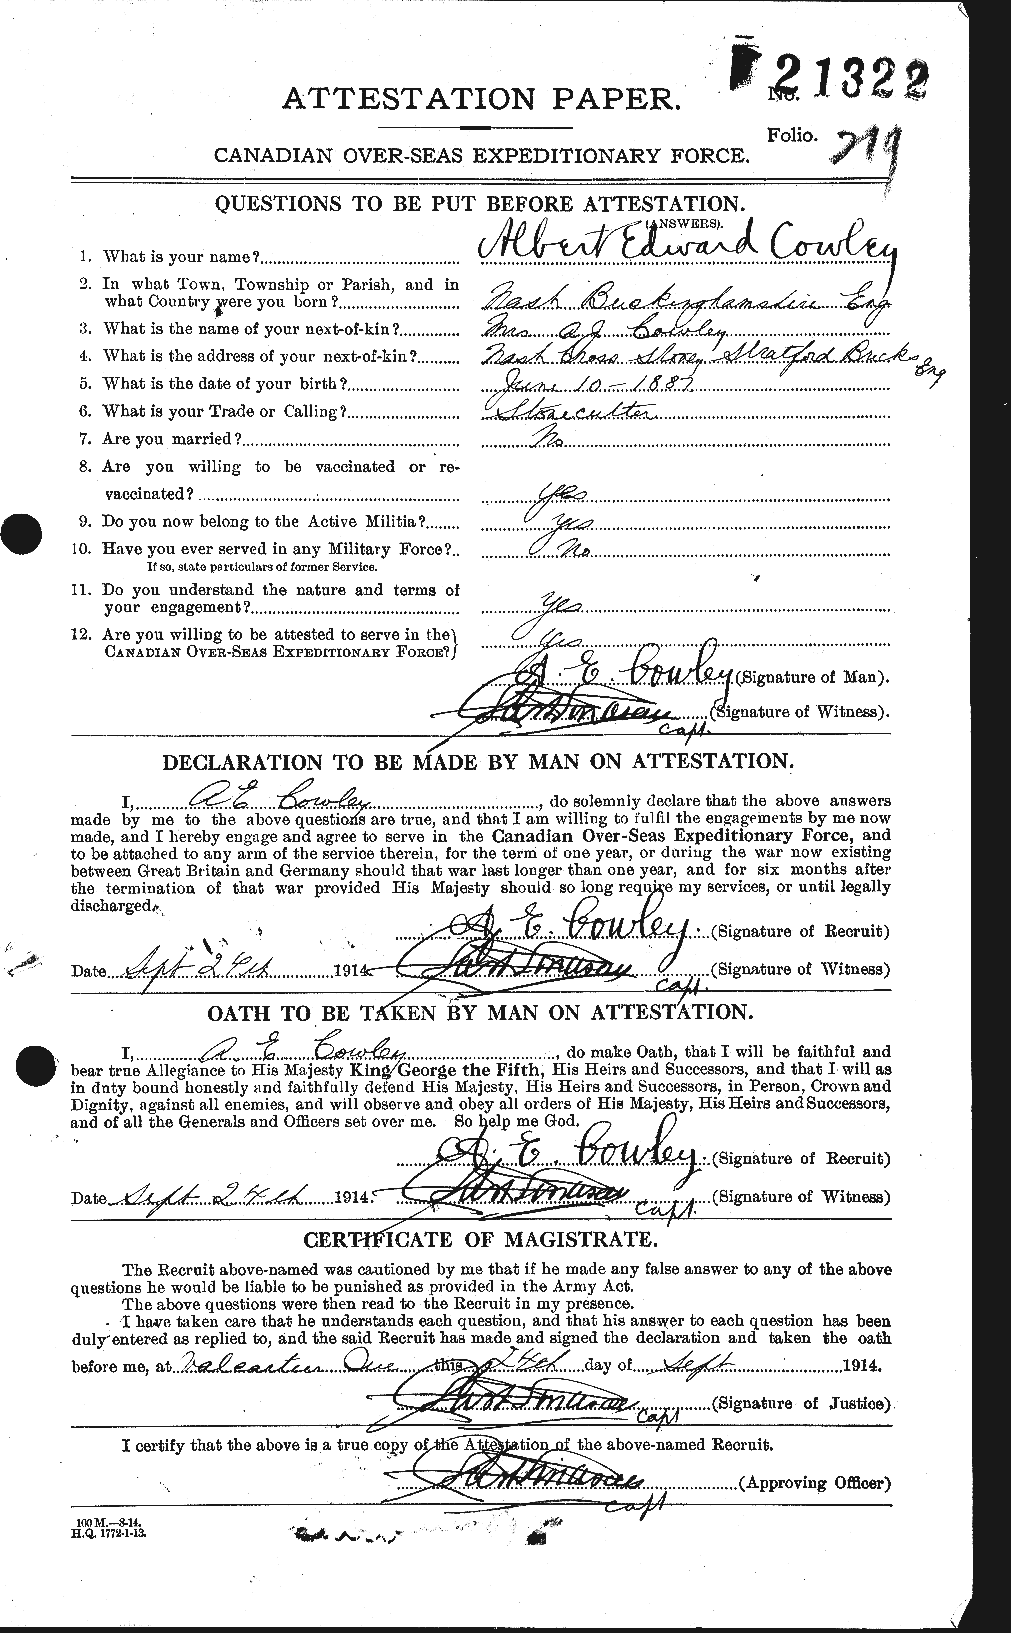 Personnel Records of the First World War - CEF 059827a